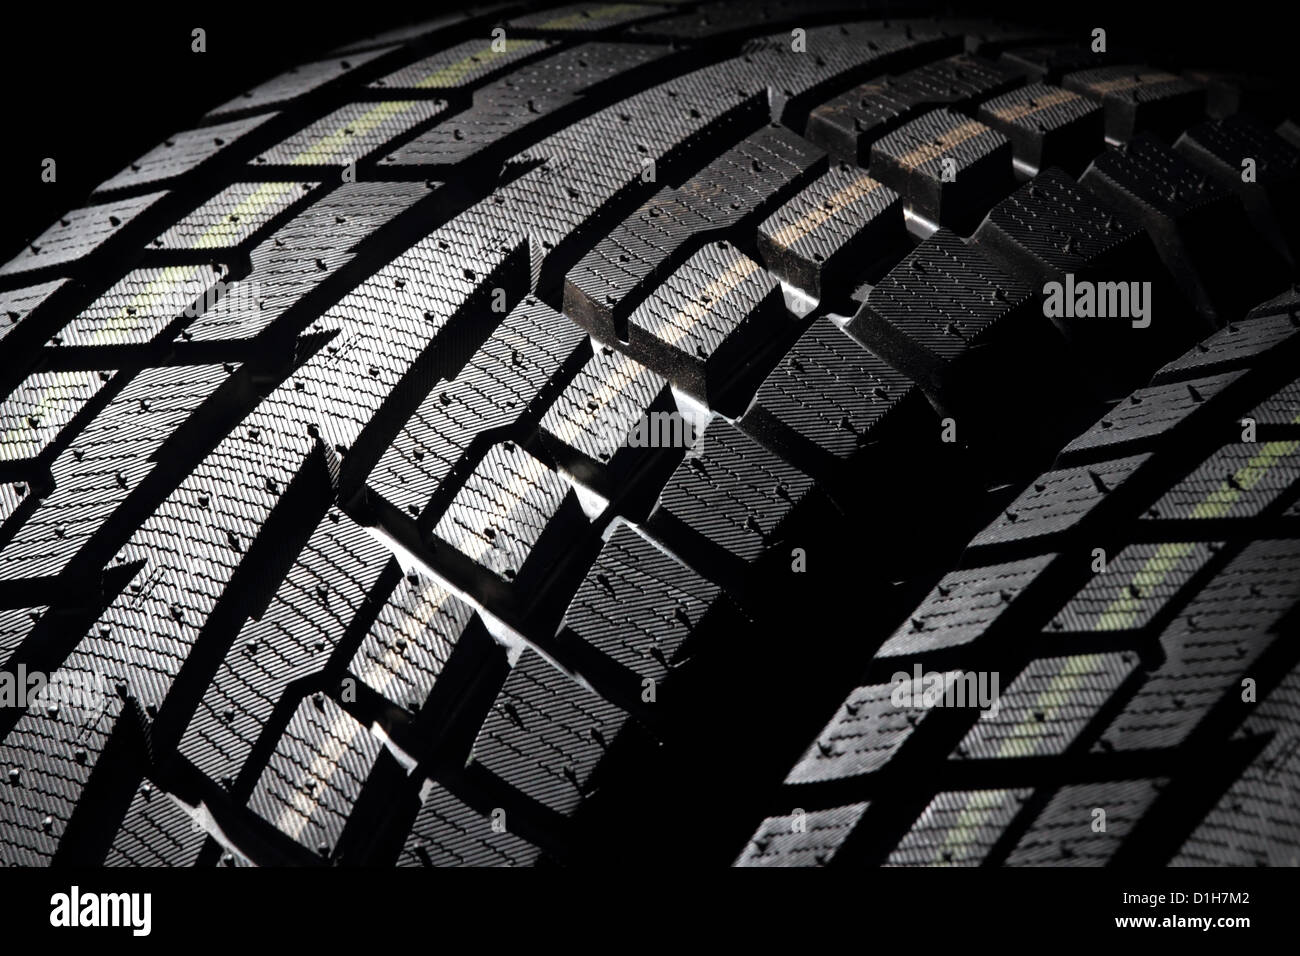 New winter tyres - images photography stock Alamy hi-res and